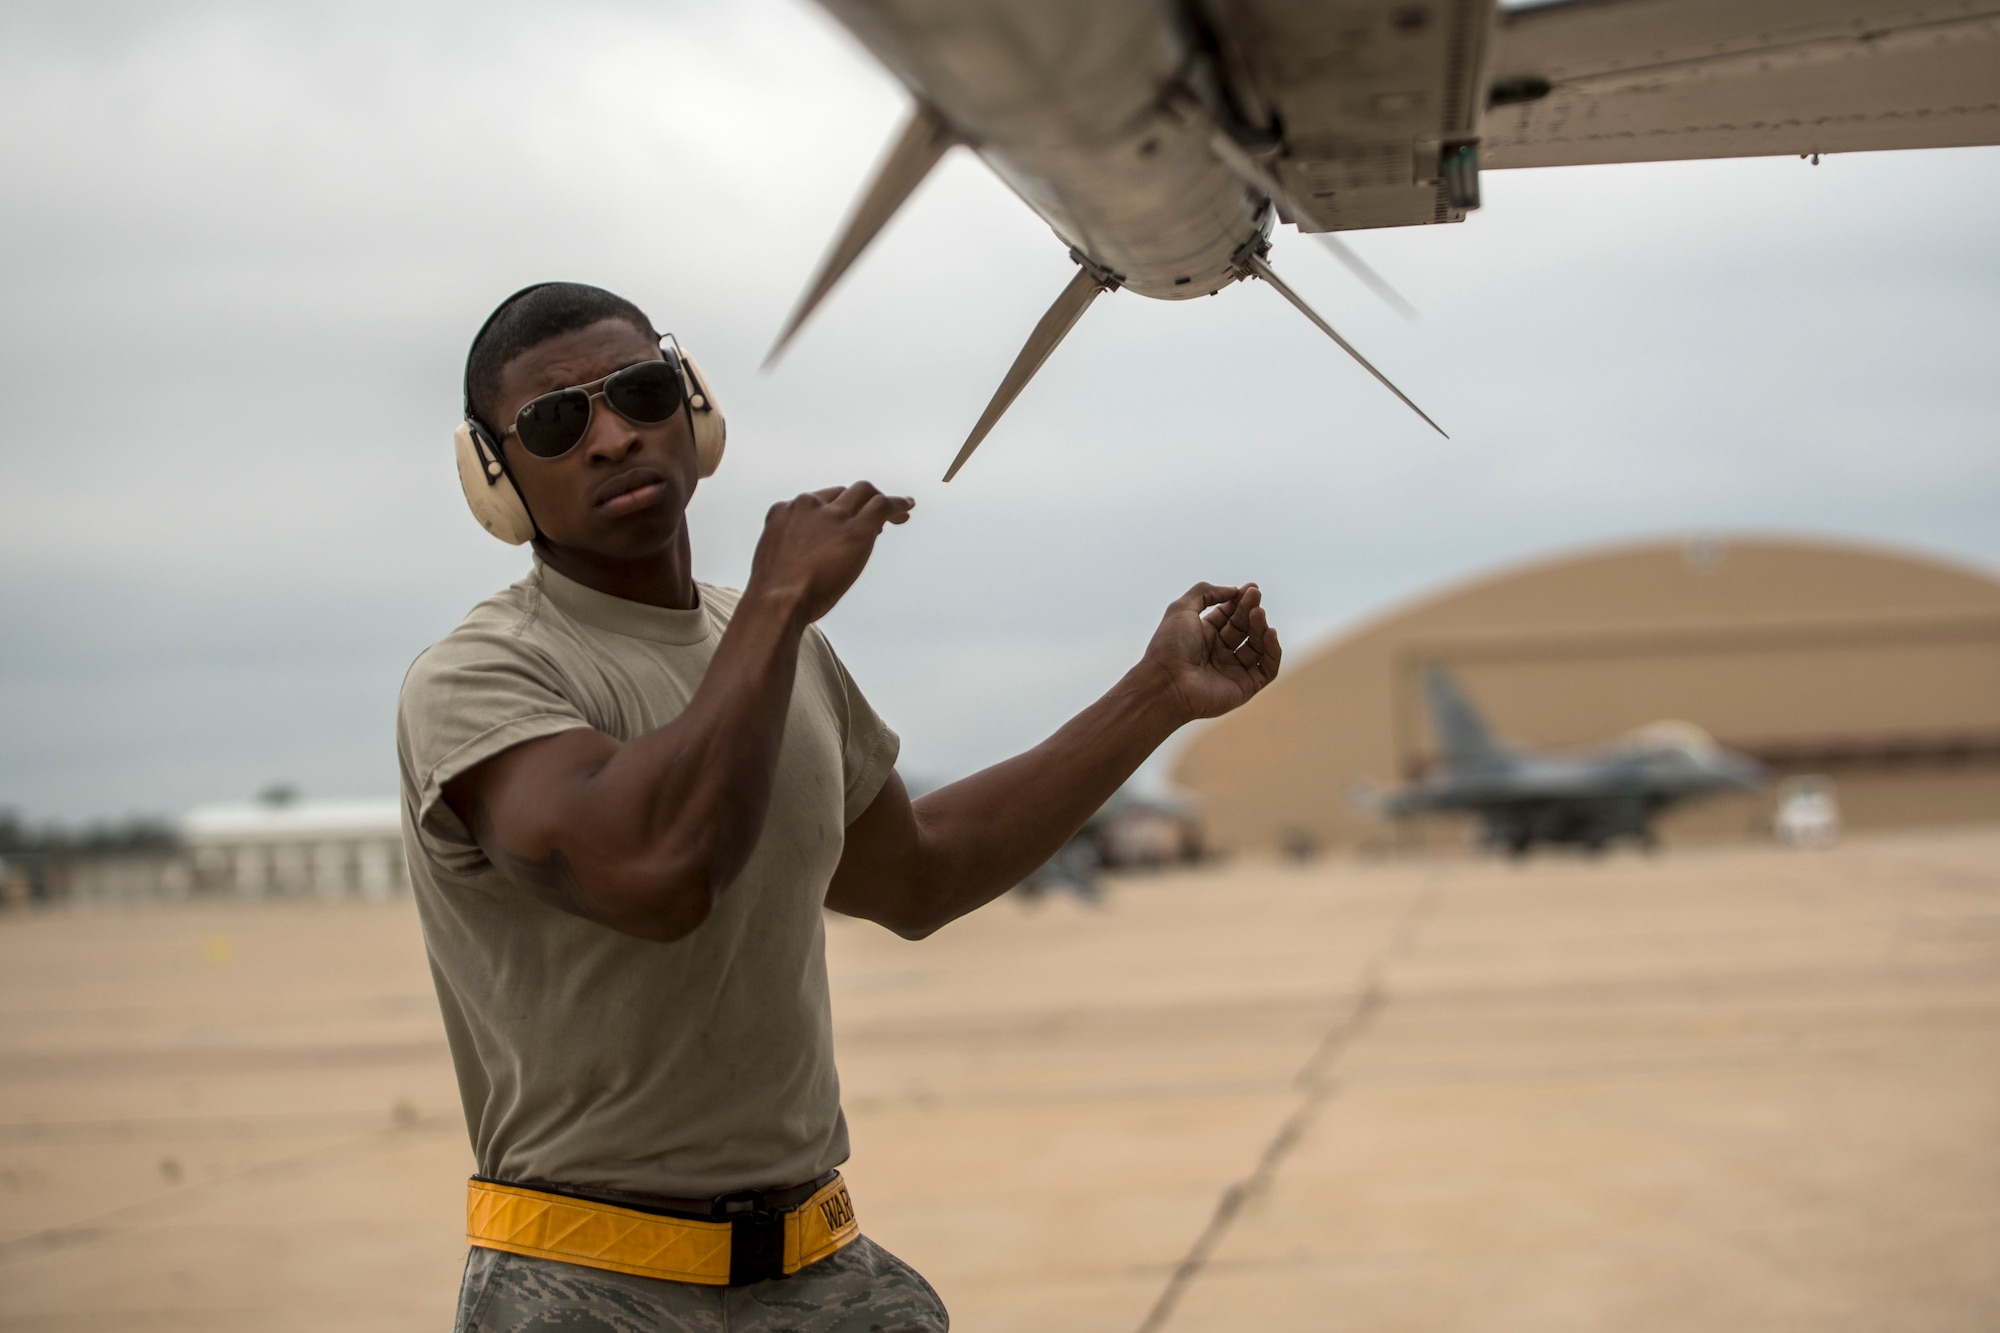 Senior Airman Avian Sharpe, 314th Aircraft Maintenance Unit weapons loader, ensures weapons are loaded to a 314th Fighter Squadron F-16 Viper, June 4, 2019, on Marine Corps Air Station Miramar, Calif. Between the 314th FS and the 314th Aircraft Maintenance Unit, 168 personnel, 16 F-16’s and 14 tons of equipment were fully functional during the temporary duty assignment in support of 258 flying training sorties. (U.S. Air Force photo by Staff Sgt. Christine Groening)